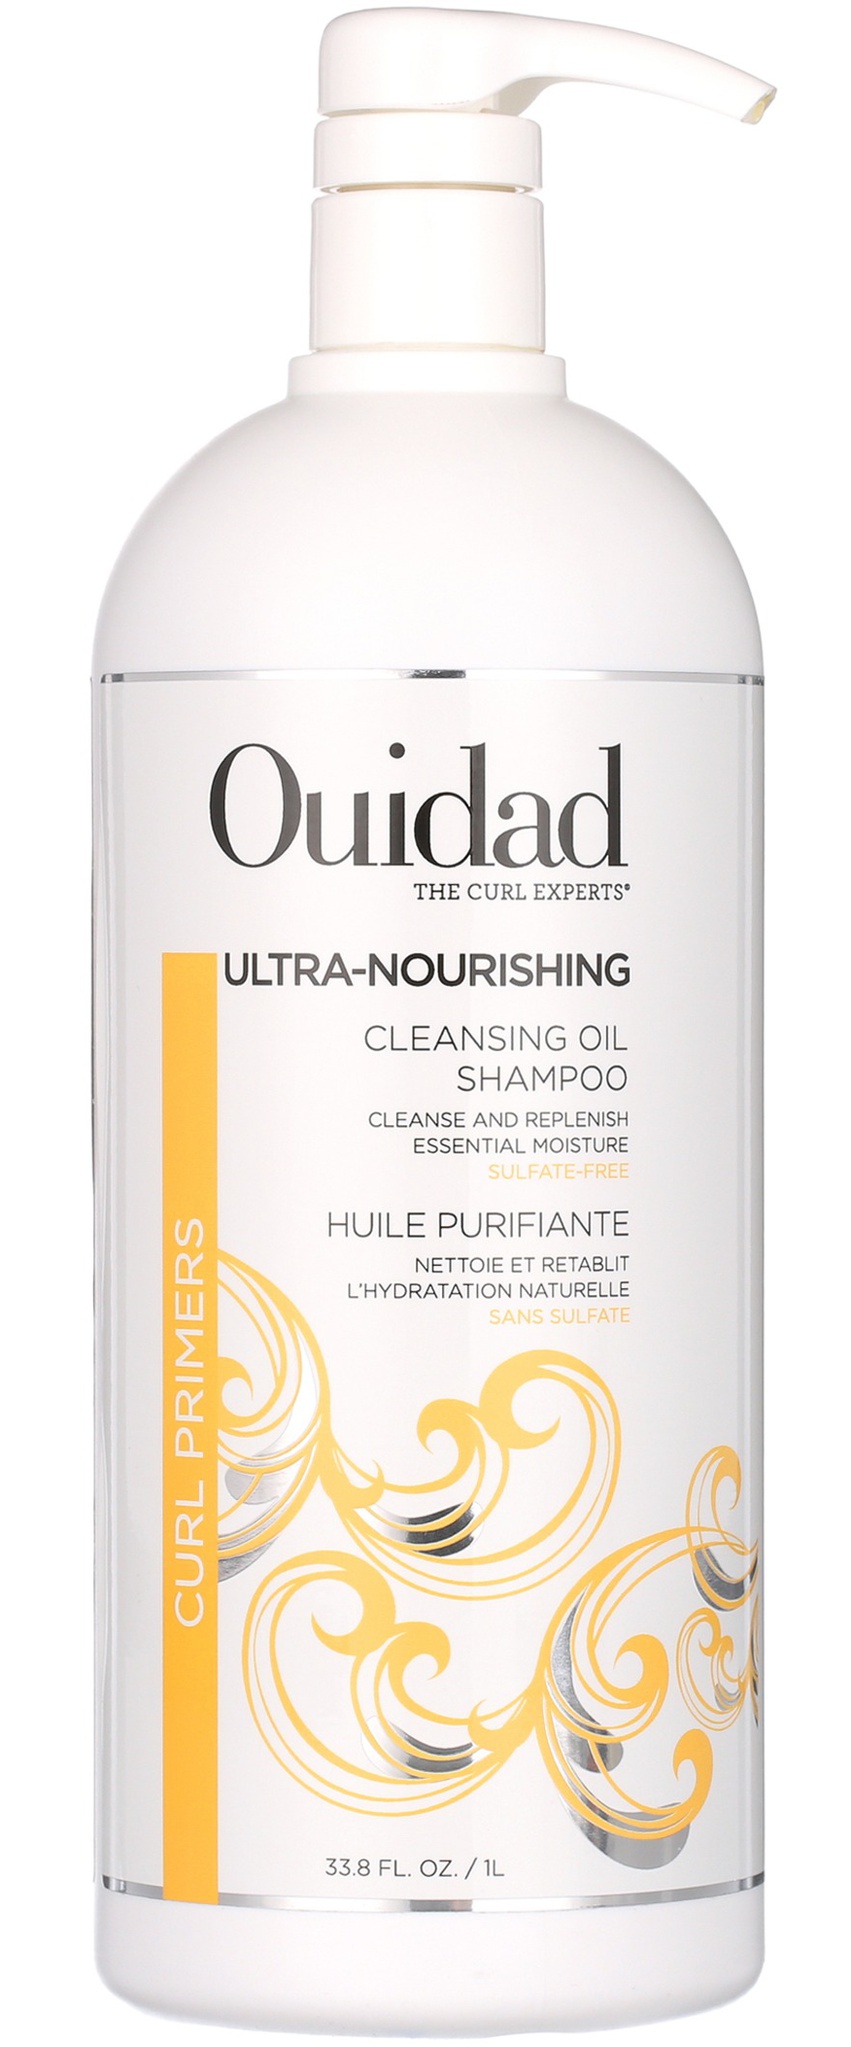 Ouidad Ultra-nourishing Cleansing Oil Shampoo